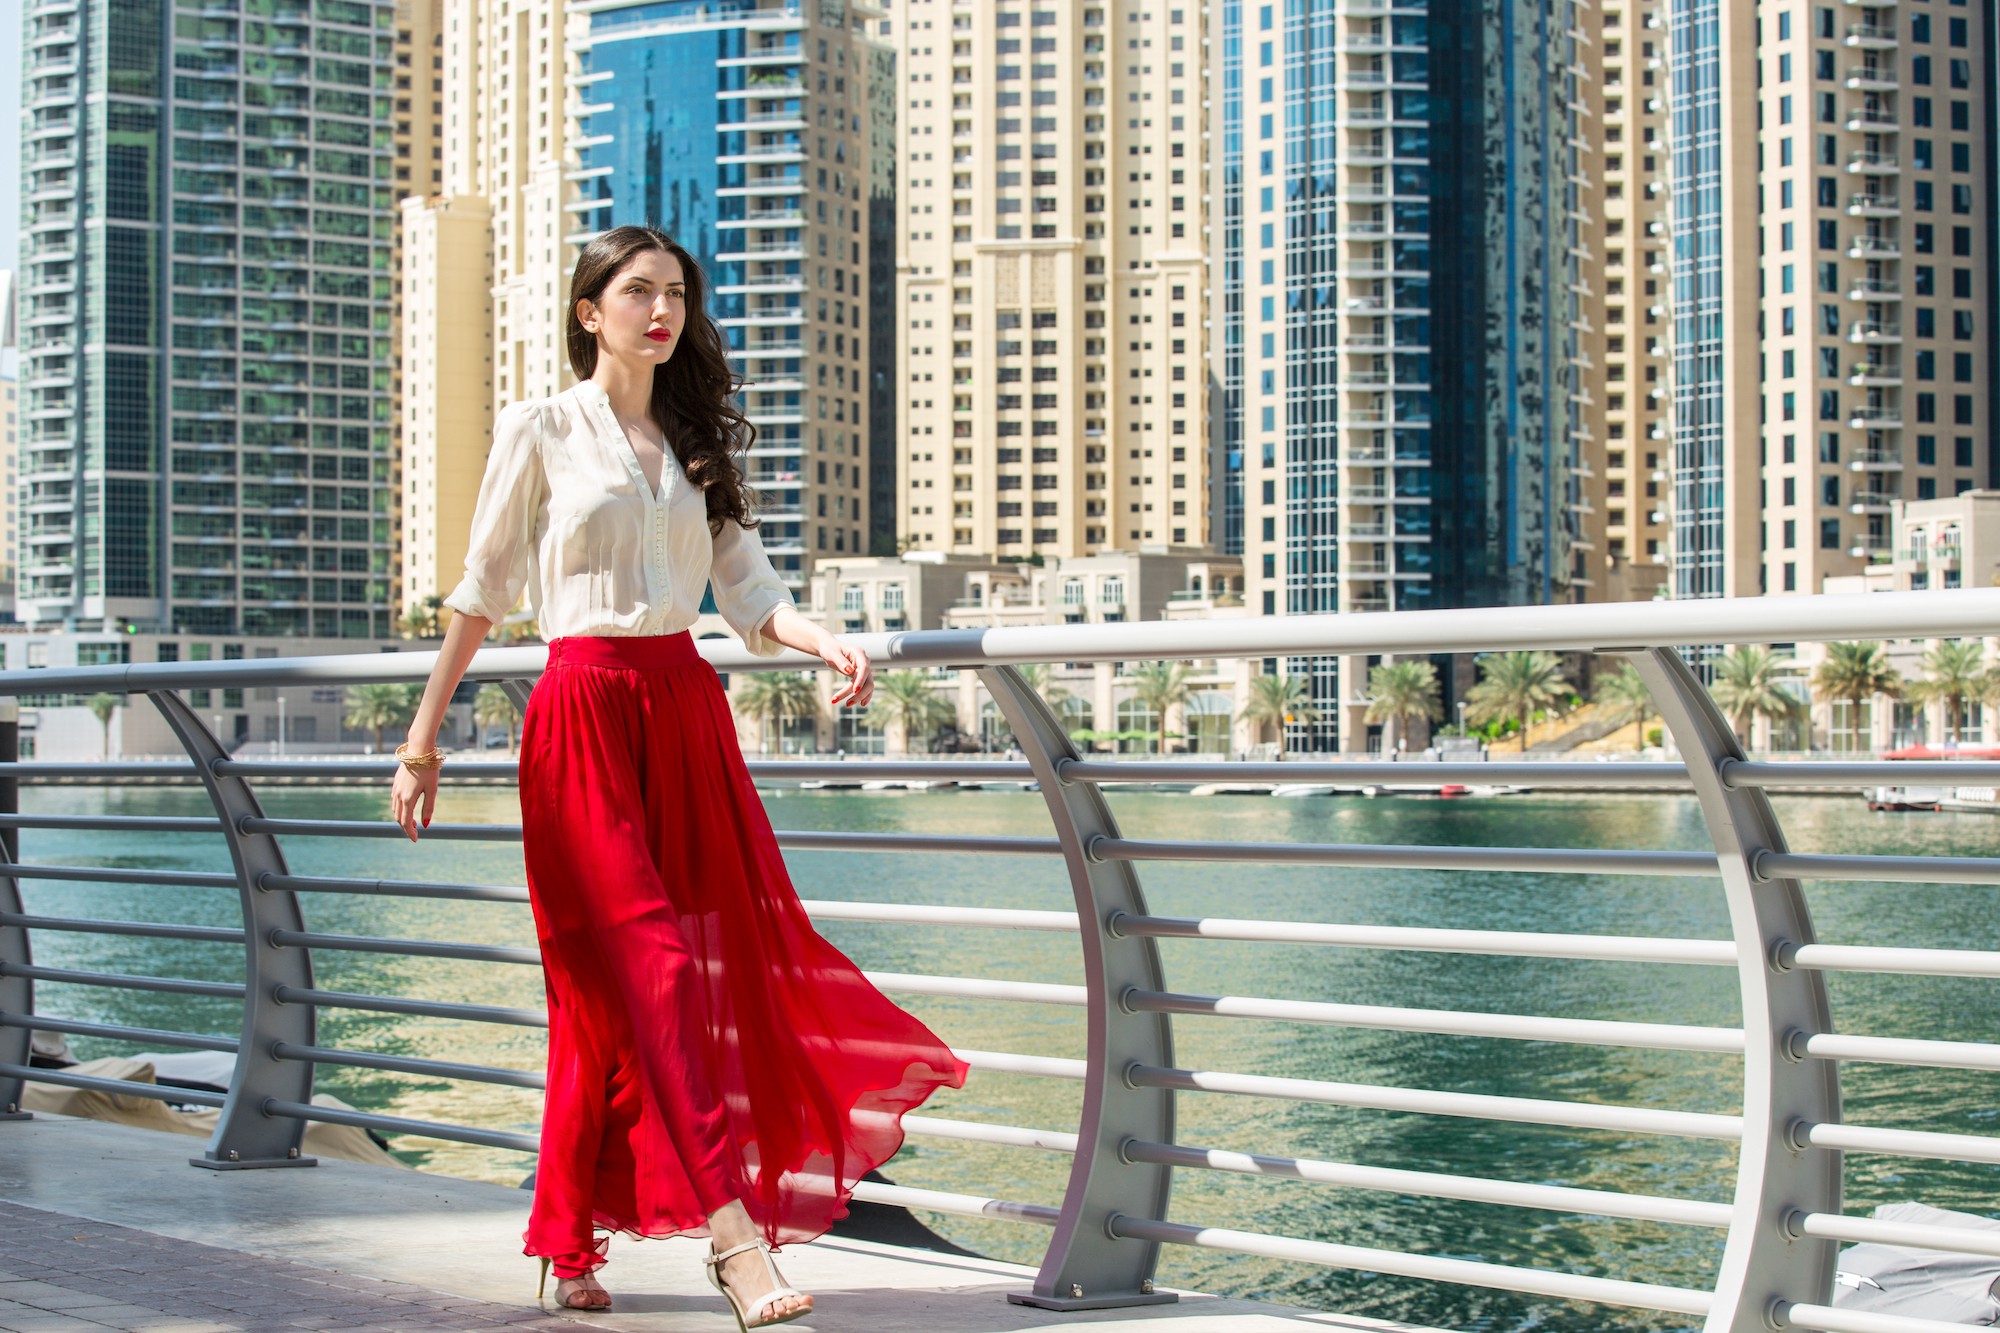 21 Maxi Skirts That Are Seriously Slimming and Perfect for Fall